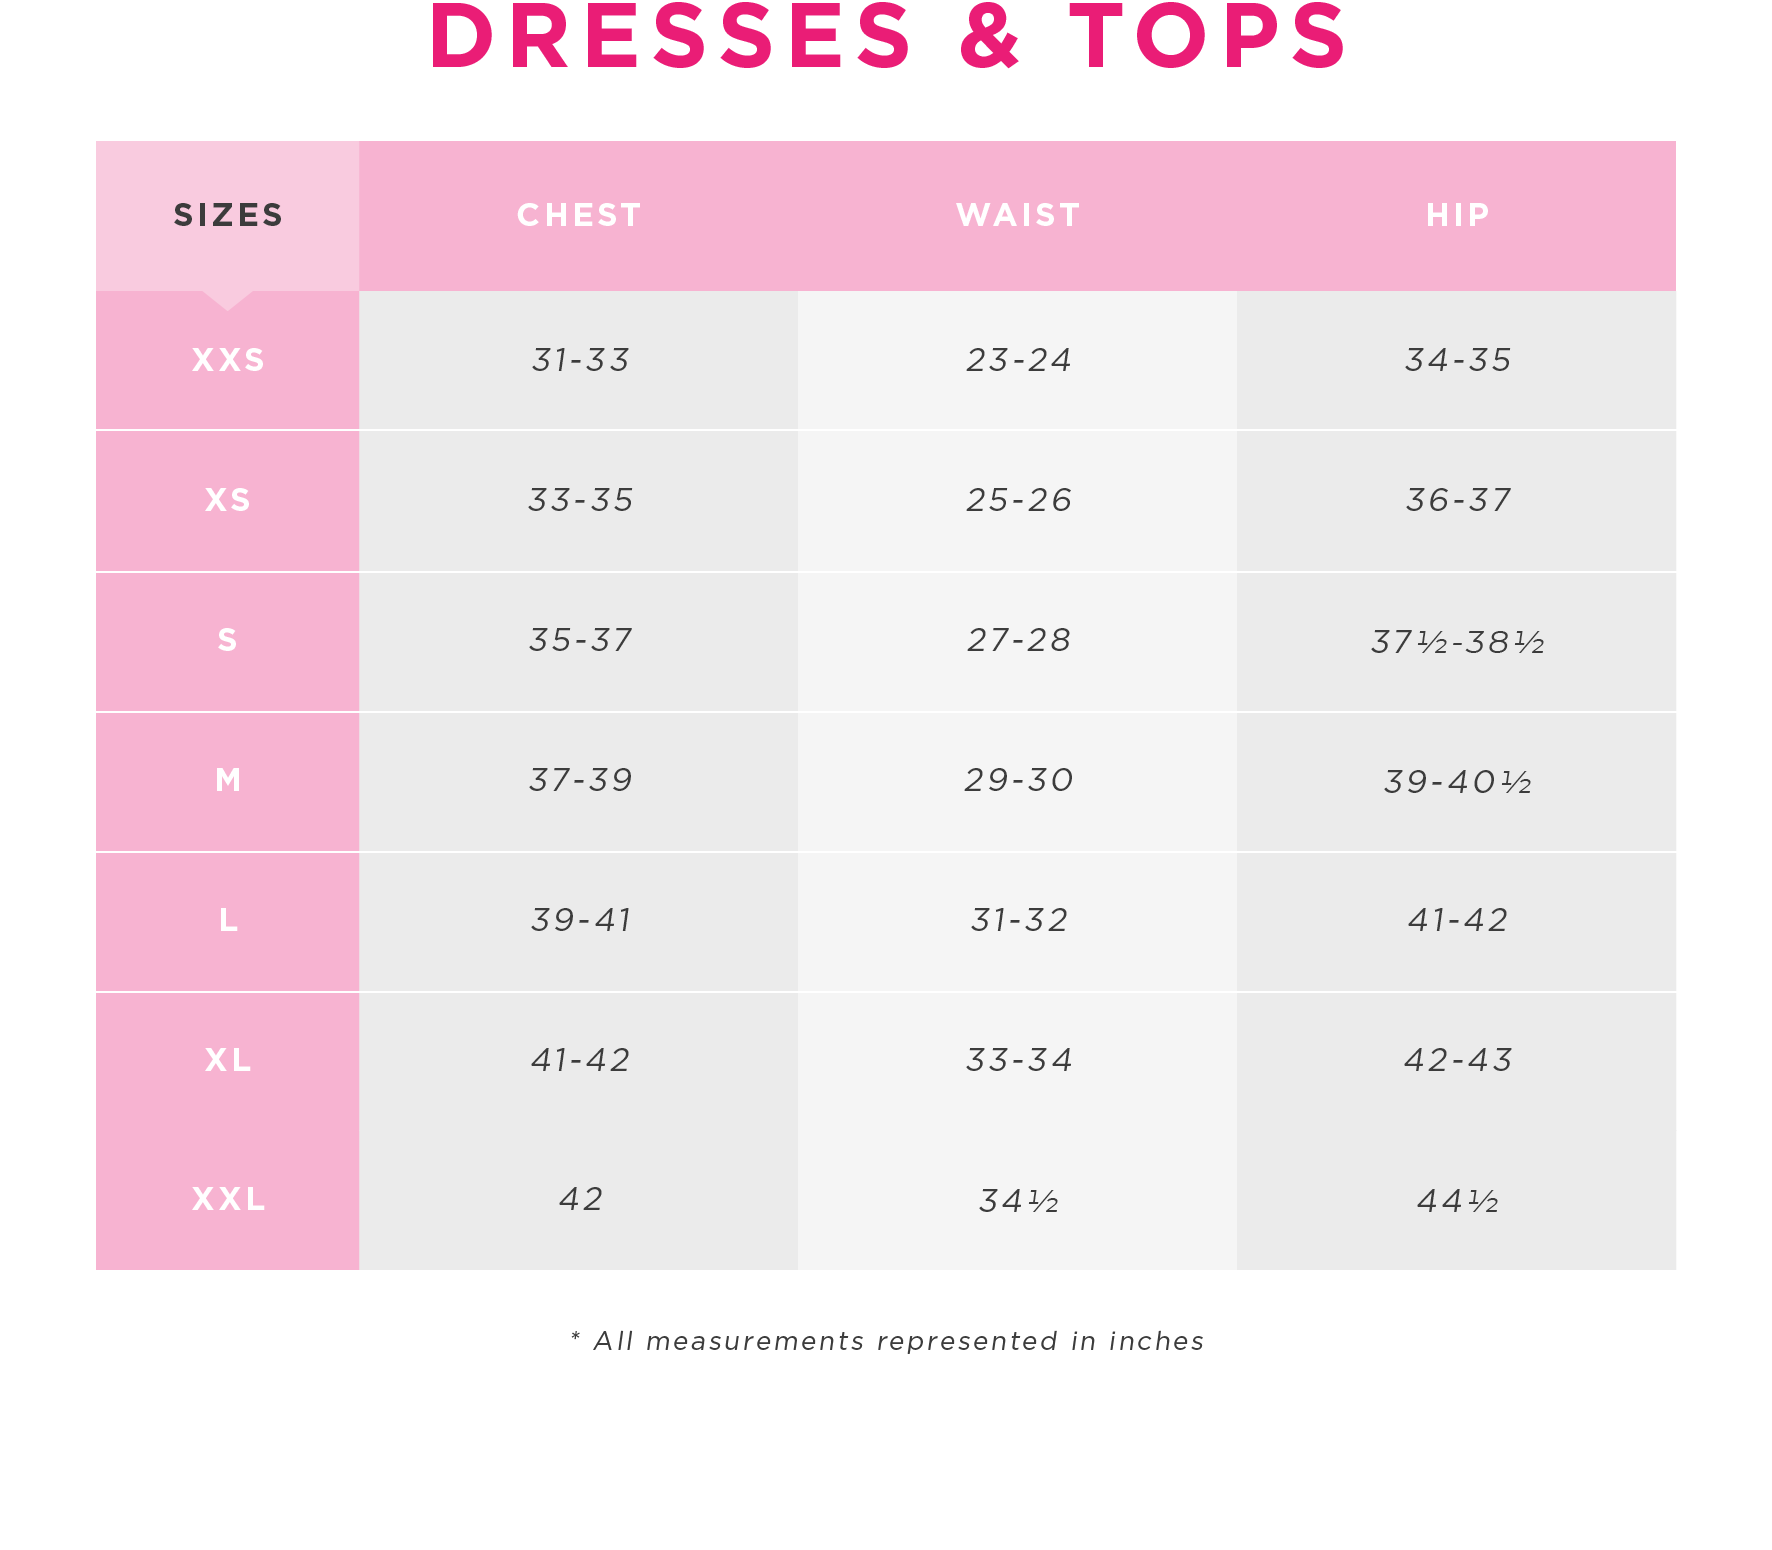 Charlotte Russe - Dresses & Tops Size Chart